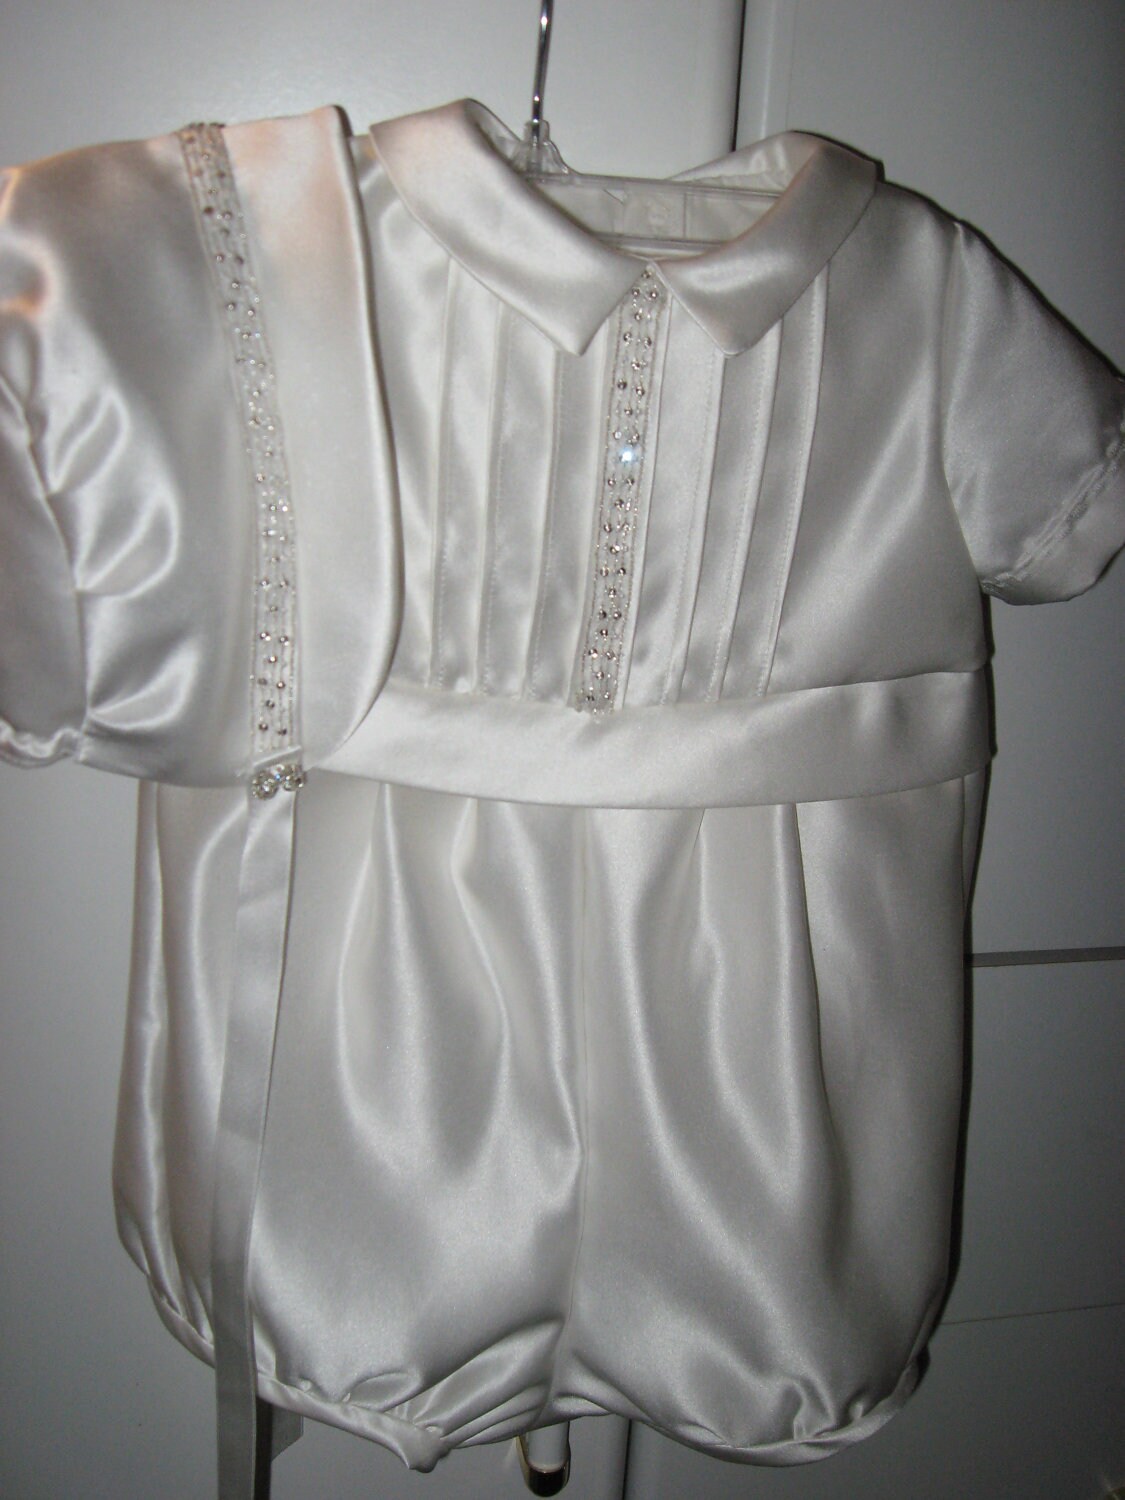 Wedding gown conversion to heirloom boys christening suit and